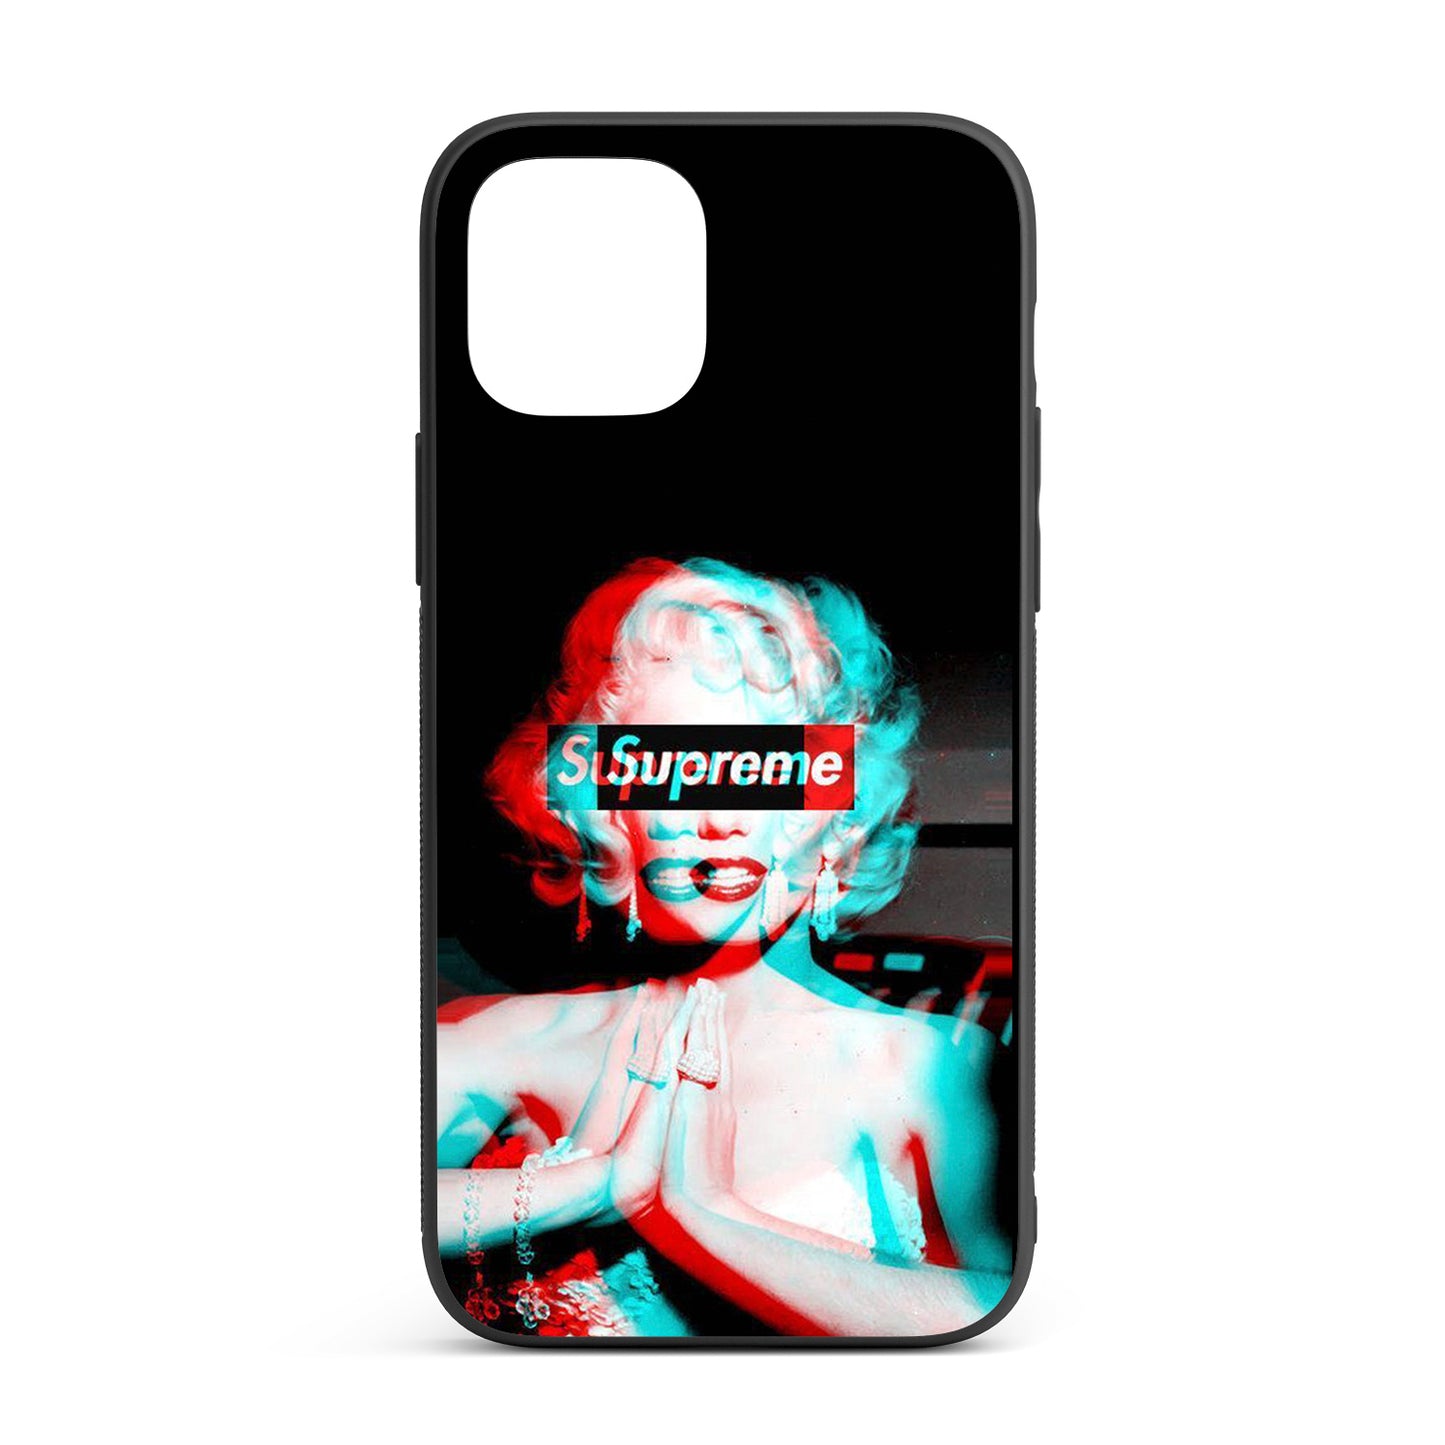 Marilyn iPhone glass case